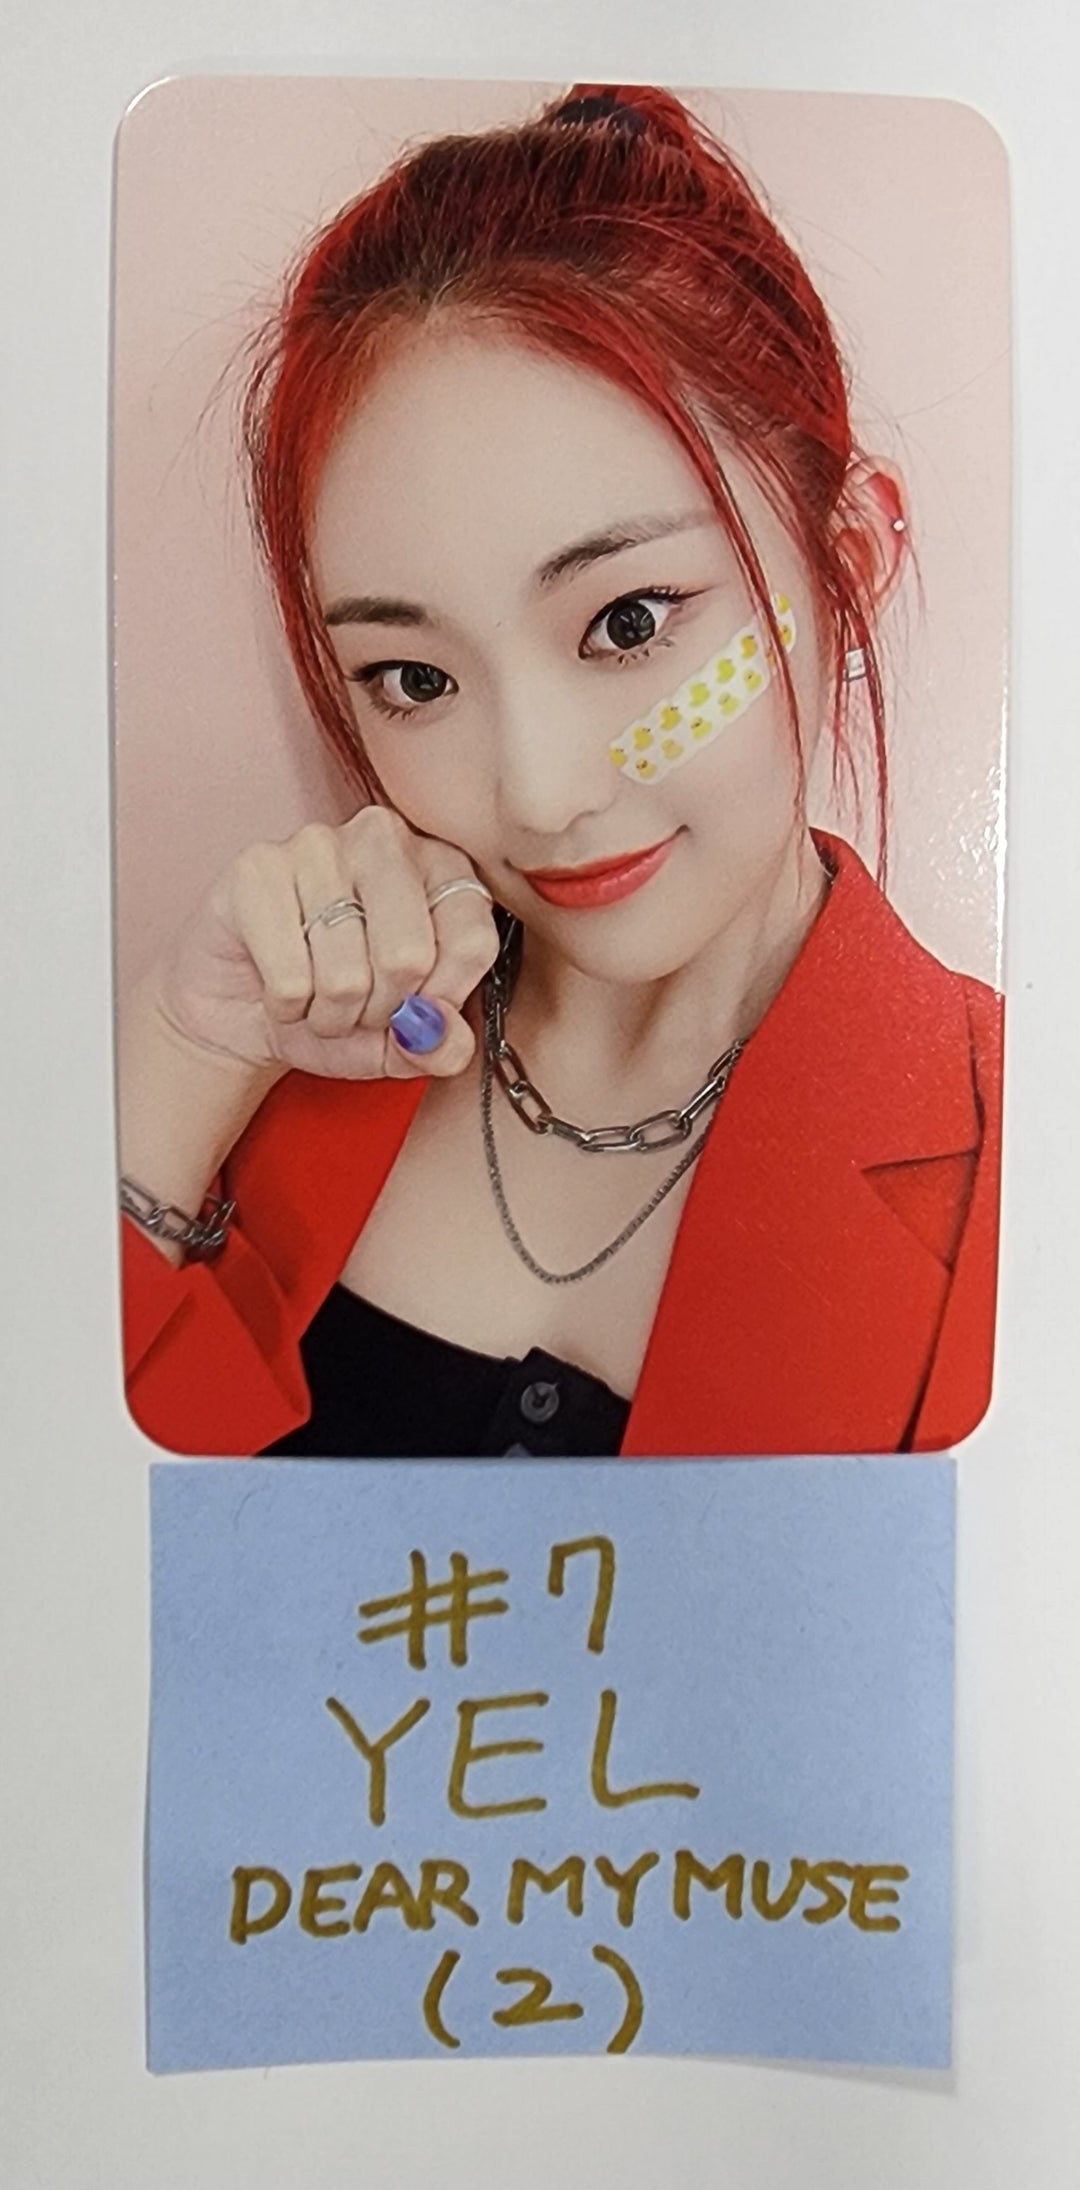 H1-KEY "Rose Blossom" Mini 1st - Dear My Muse Fansign Event Photocard Round 2